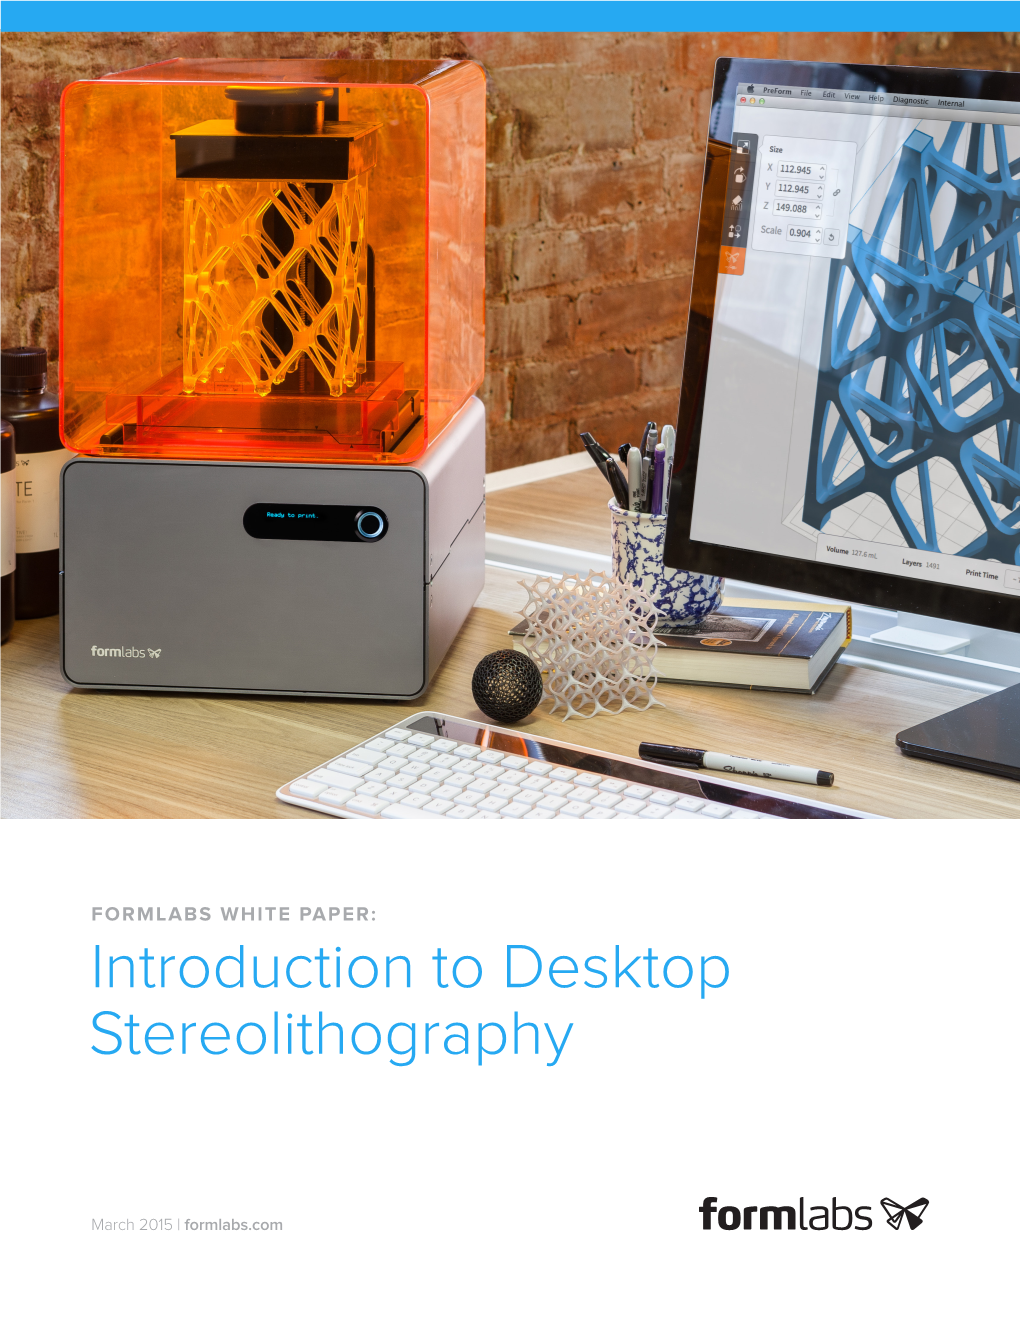 Introduction to Desktop Stereolithography